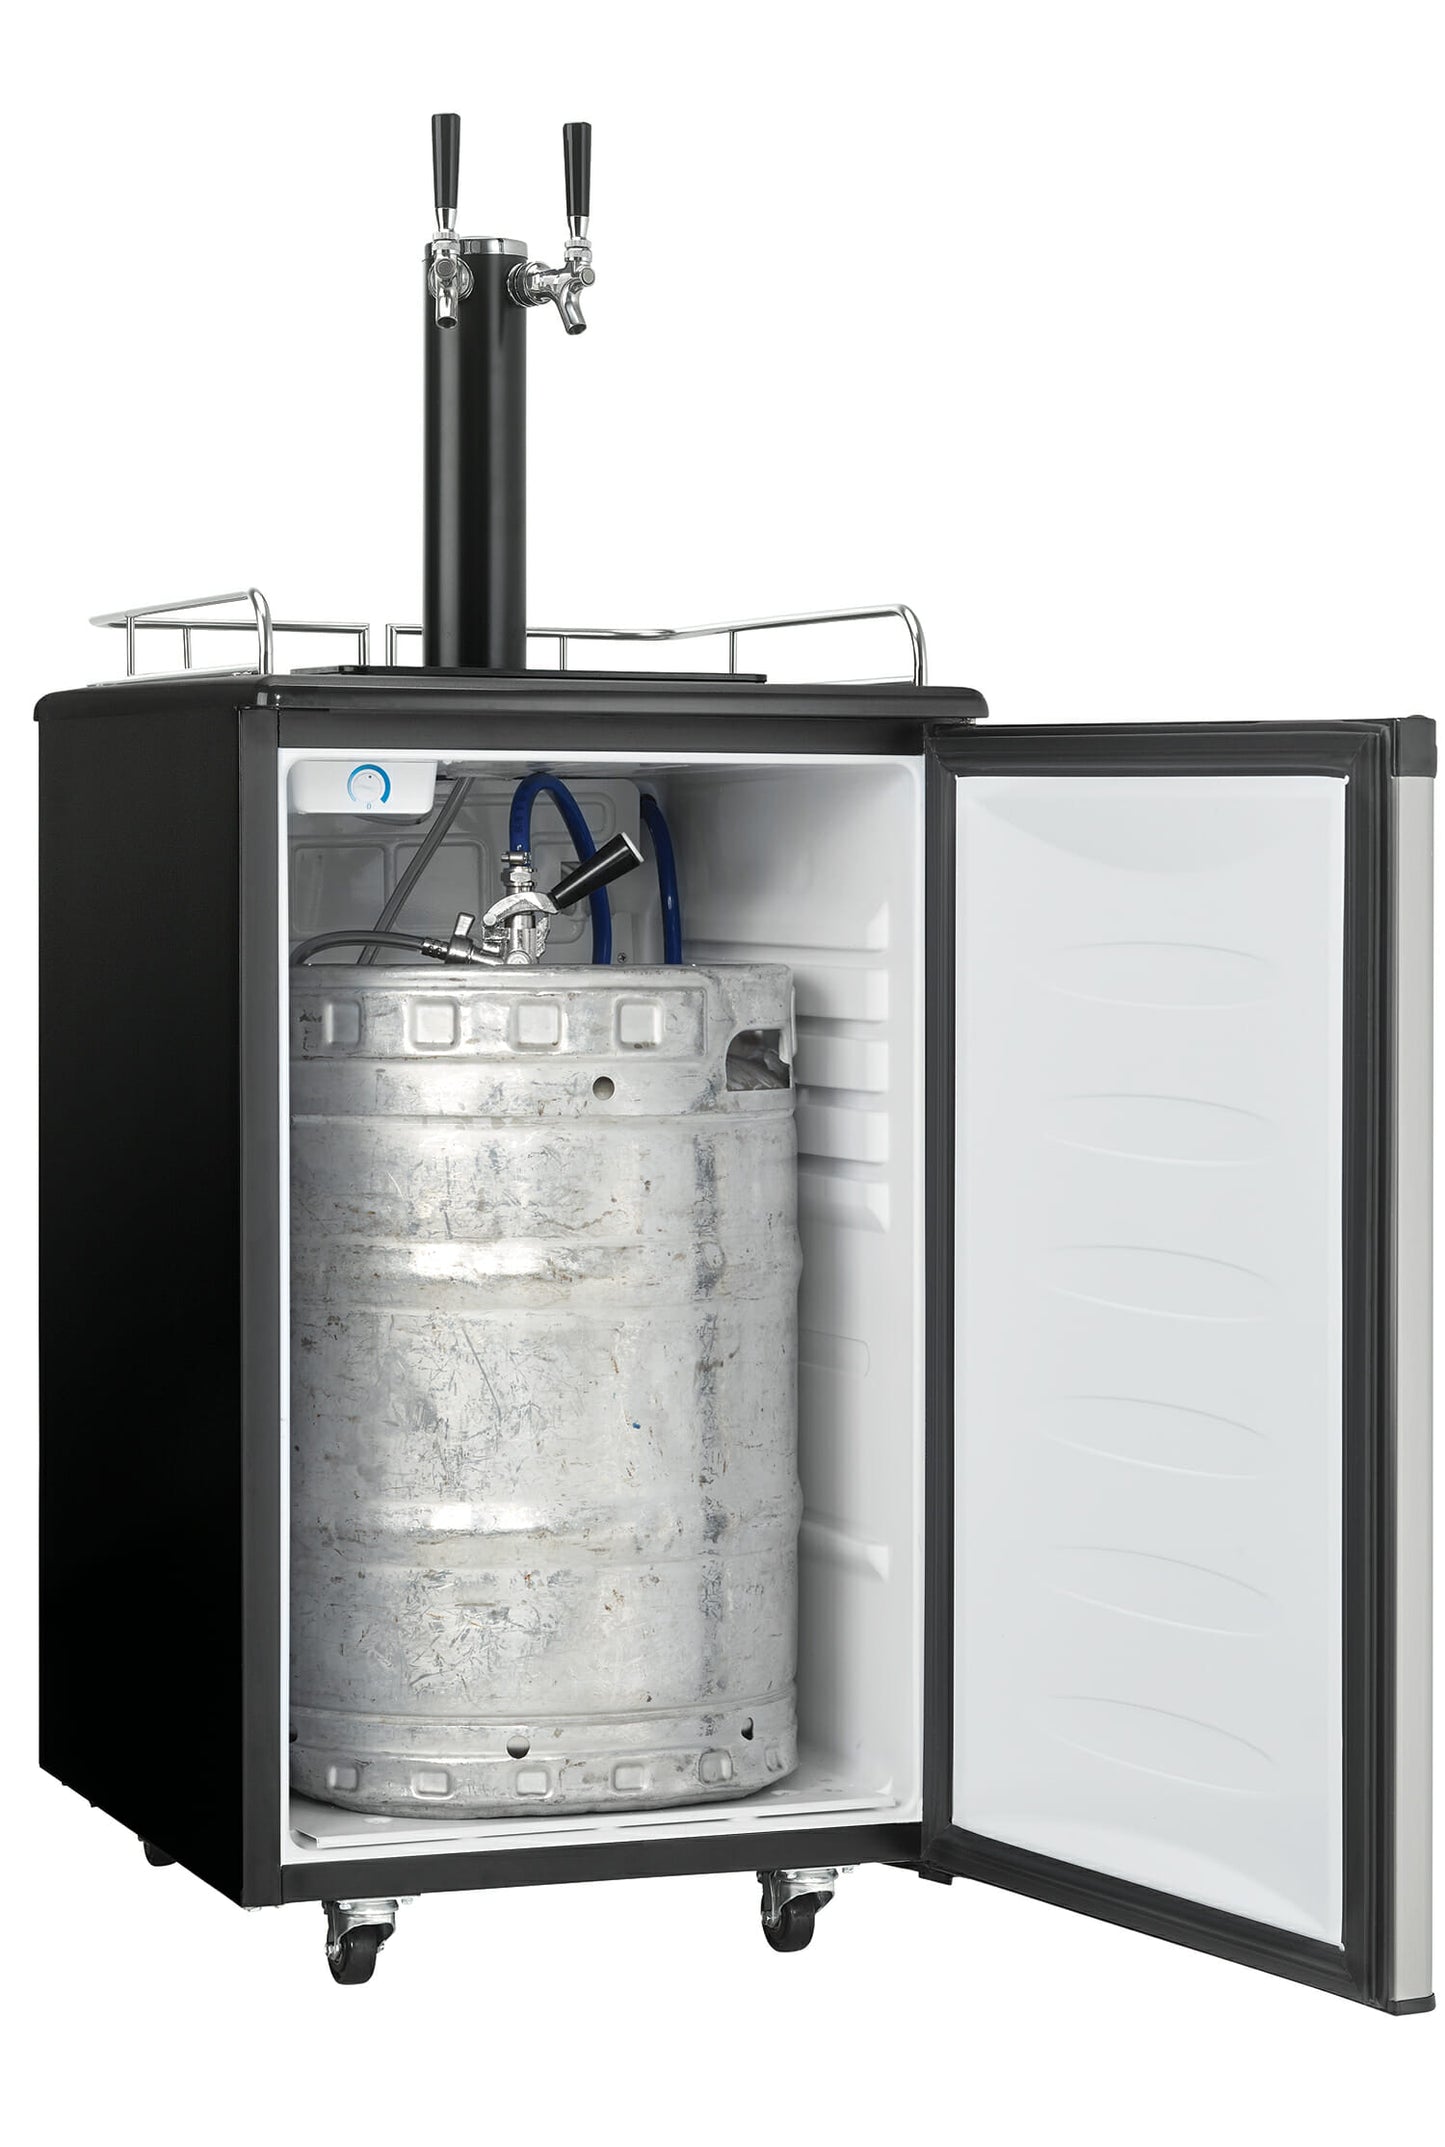 Danby 5.4 cu. ft. Dual-Tap Keg Cooler in Stainless Steel - DKC054A1BSL2DB